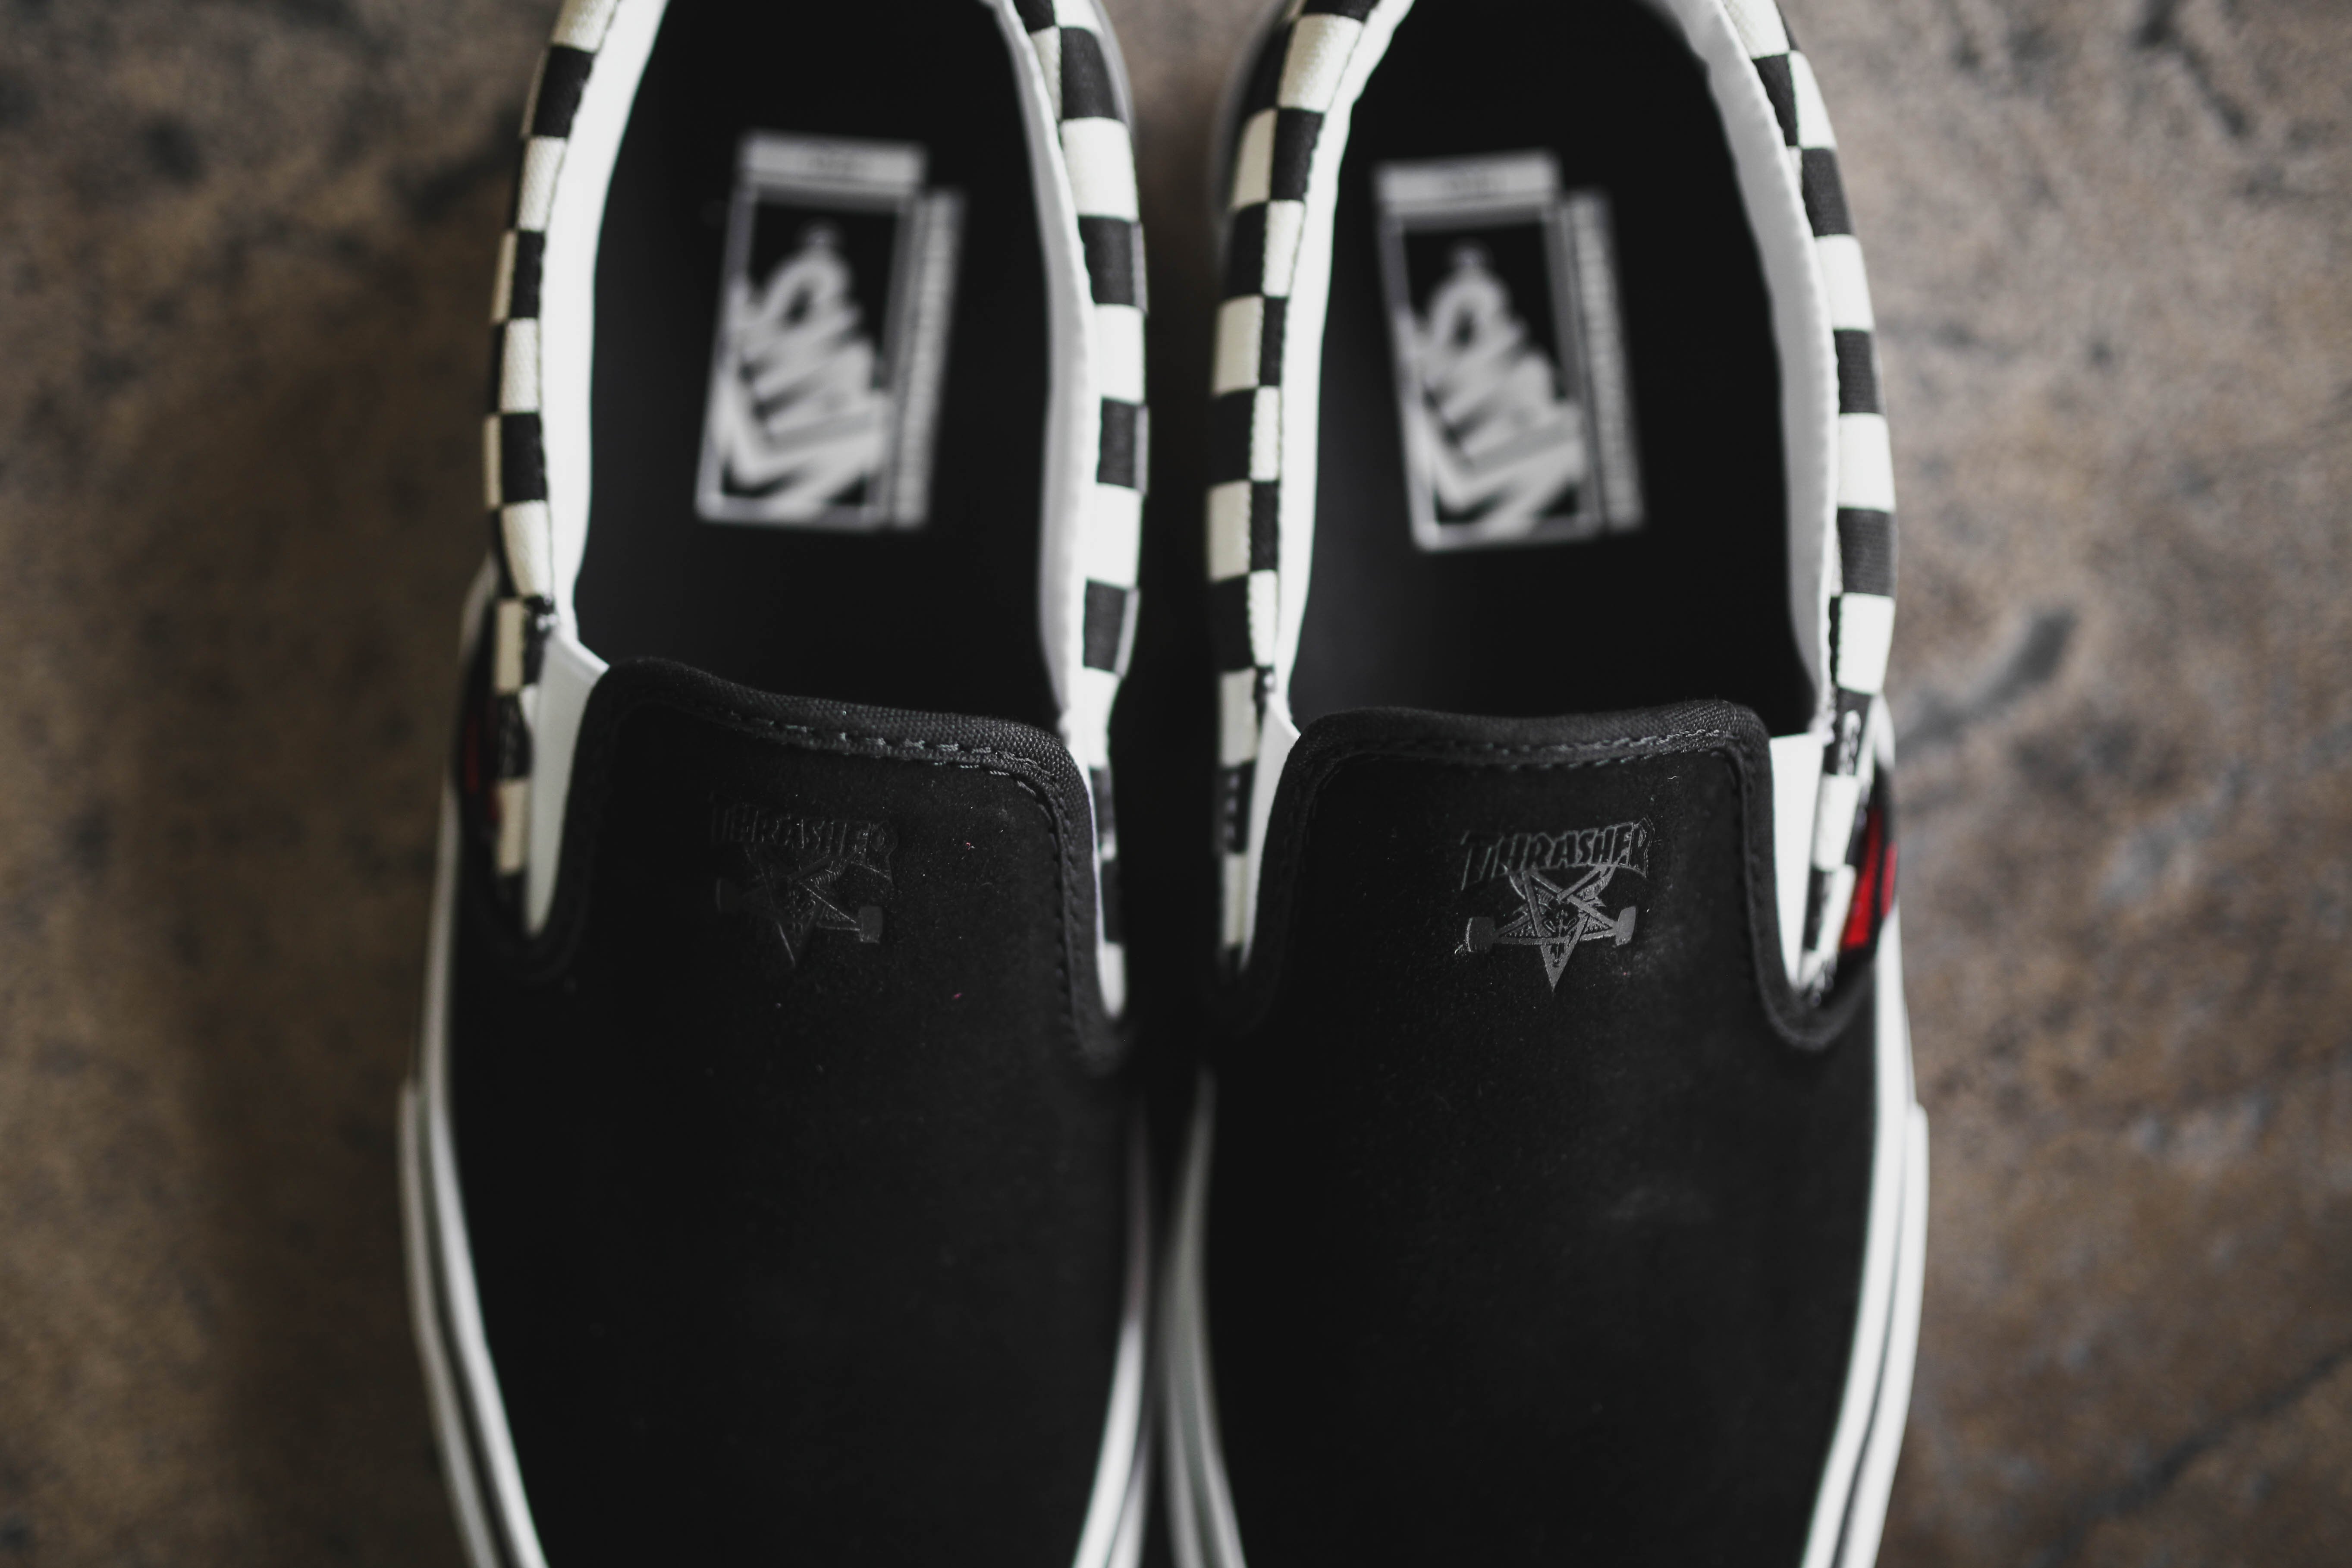 Our first look at Vans x Thrasher collection. - MASSES